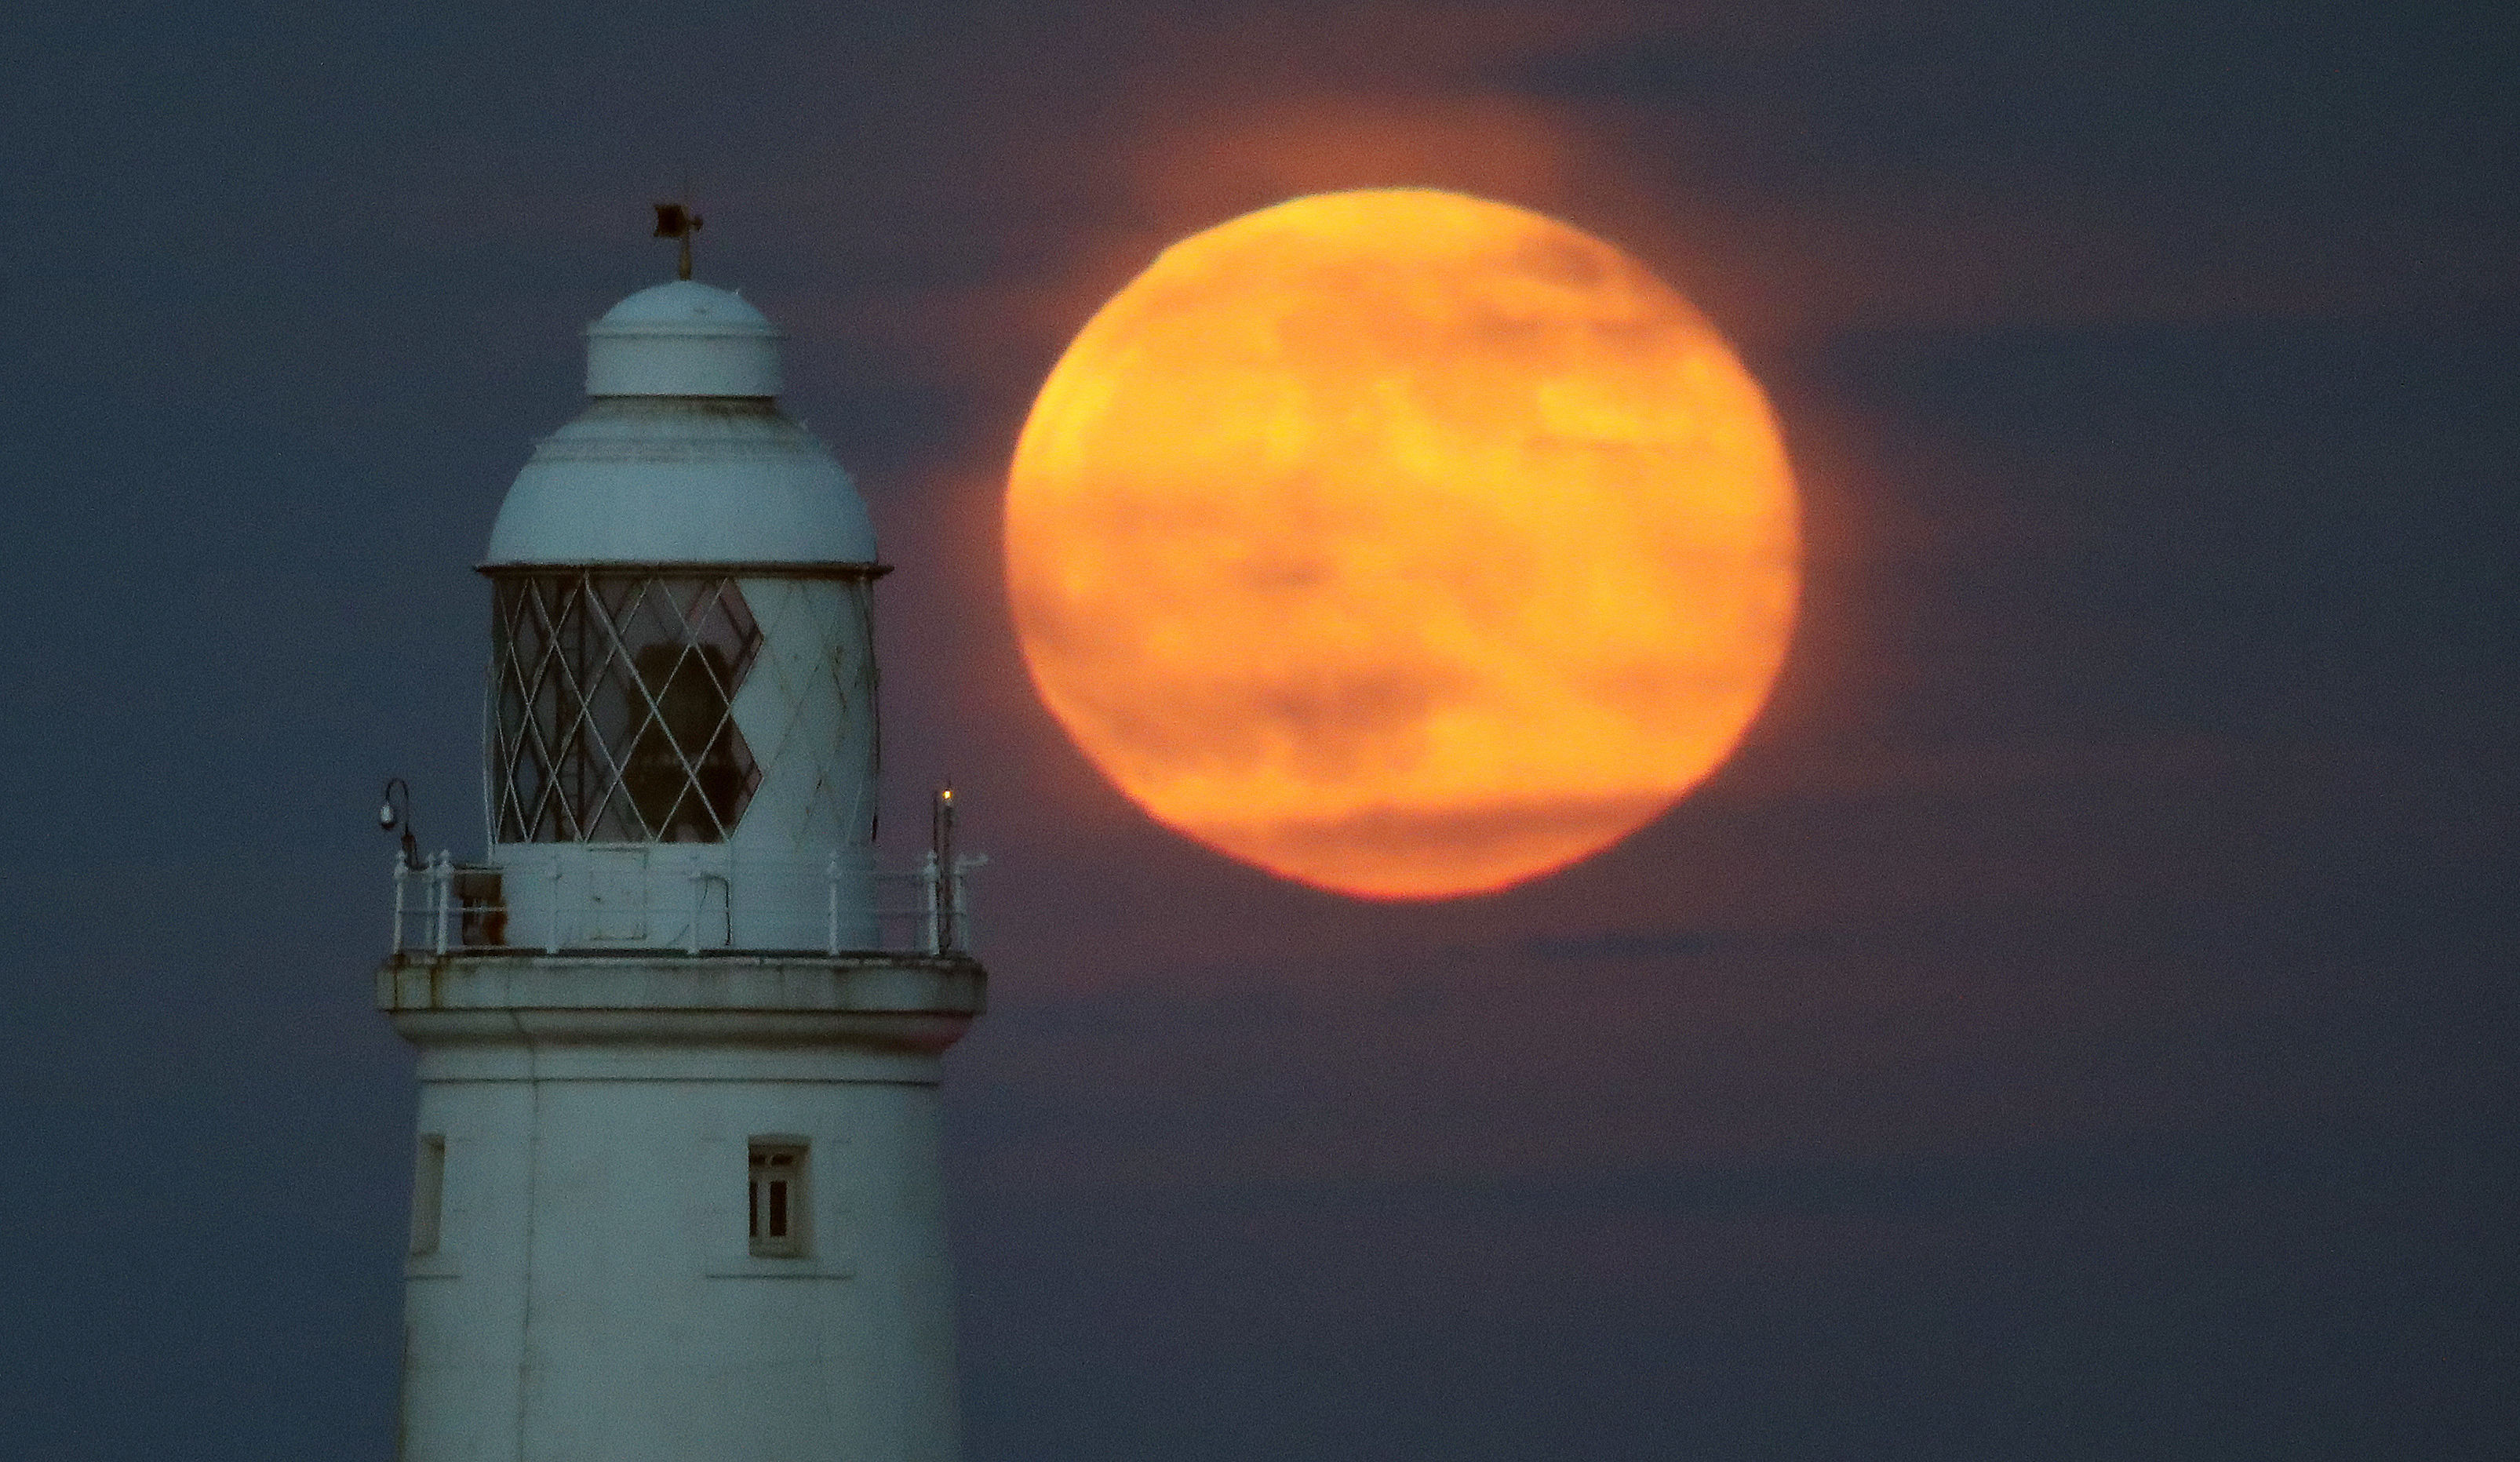 8 different types of moon to celebrate Moon Day - The Irish News